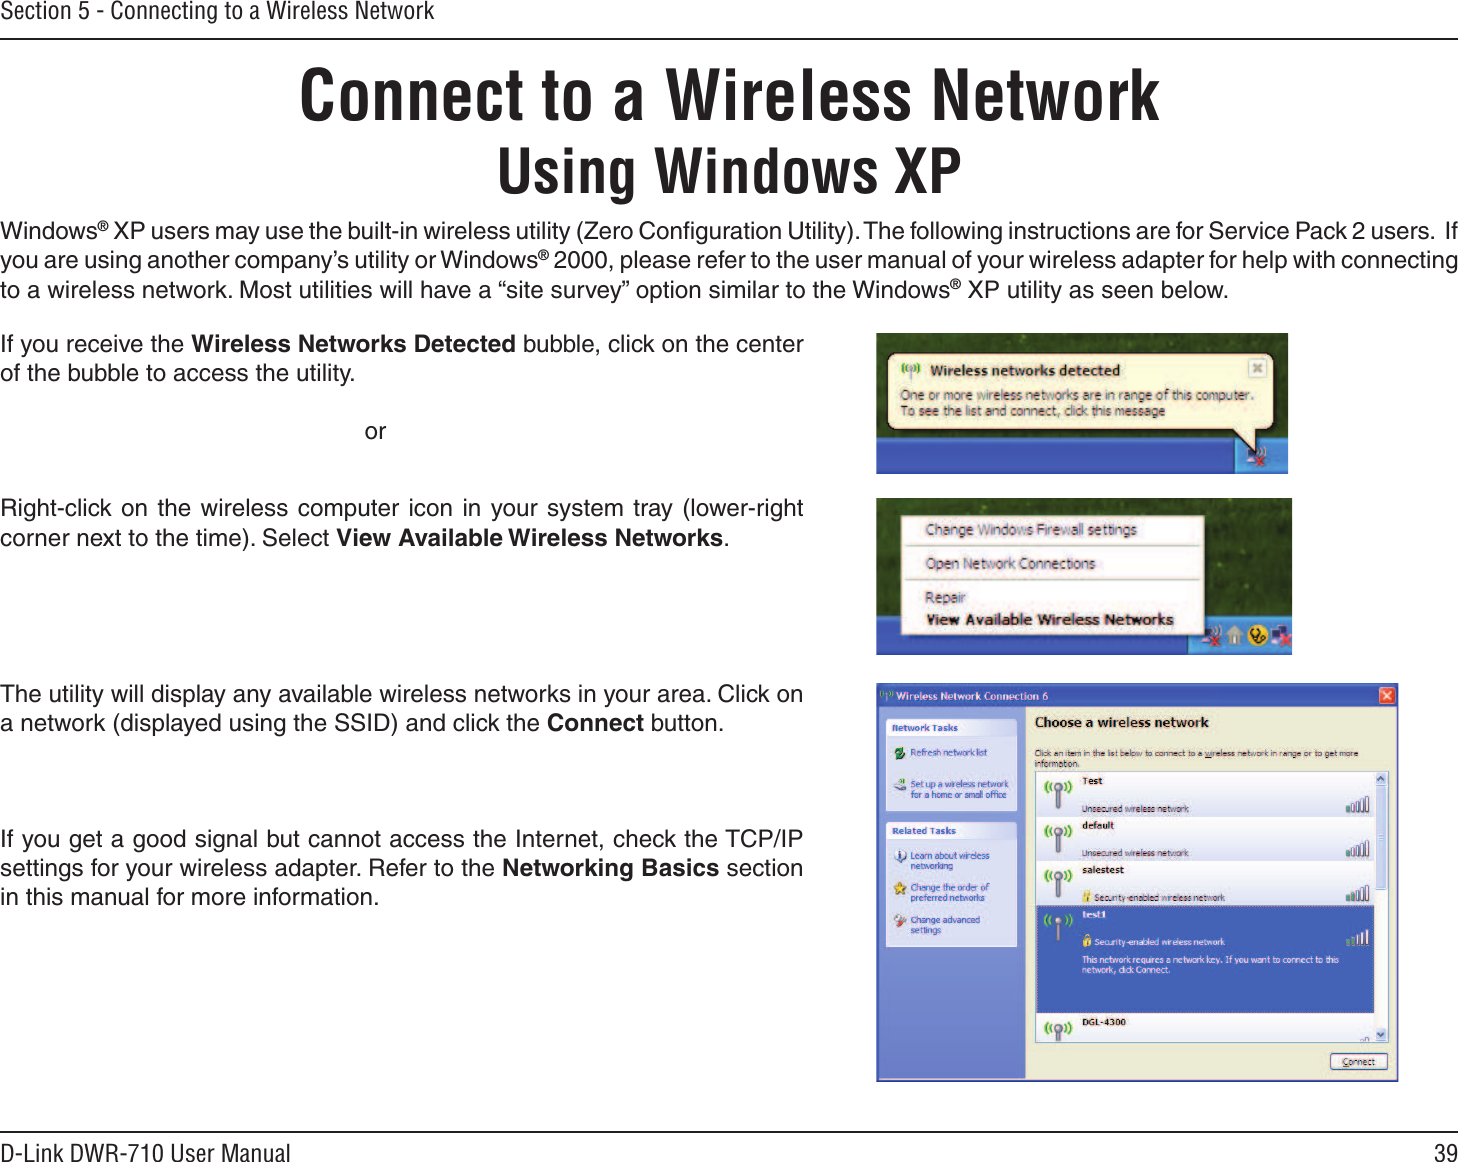 39D-Link DWR-710 User ManualSection 5 - Connecting to a Wireless NetworkConnect to a Wireless NetworkUsing Windows XPWindows® XP users may use the built-in wireless utility (Zero Conﬁguration Utility). The following instructions are for Service Pack 2 users.  If you are using another company’s utility or Windows® 2000, please refer to the user manual of your wireless adapter for help with connecting to a wireless network. Most utilities will have a “site survey” option similar to the Windows® XP utility as seen below.Right-click on the wireless  computer  icon  in  your system  tray (lower-right corner next to the time). Select View Available Wireless Networks.If you receive the Wireless Networks Detected bubble, click on the center of the bubble to access the utility.     orThe utility will display any available wireless networks in your area. Click on a network (displayed using the SSID) and click the Connect button.If you get a good signal but cannot access the Internet, check the TCP/IP settings for your wireless adapter. Refer to the Networking Basics section in this manual for more information.